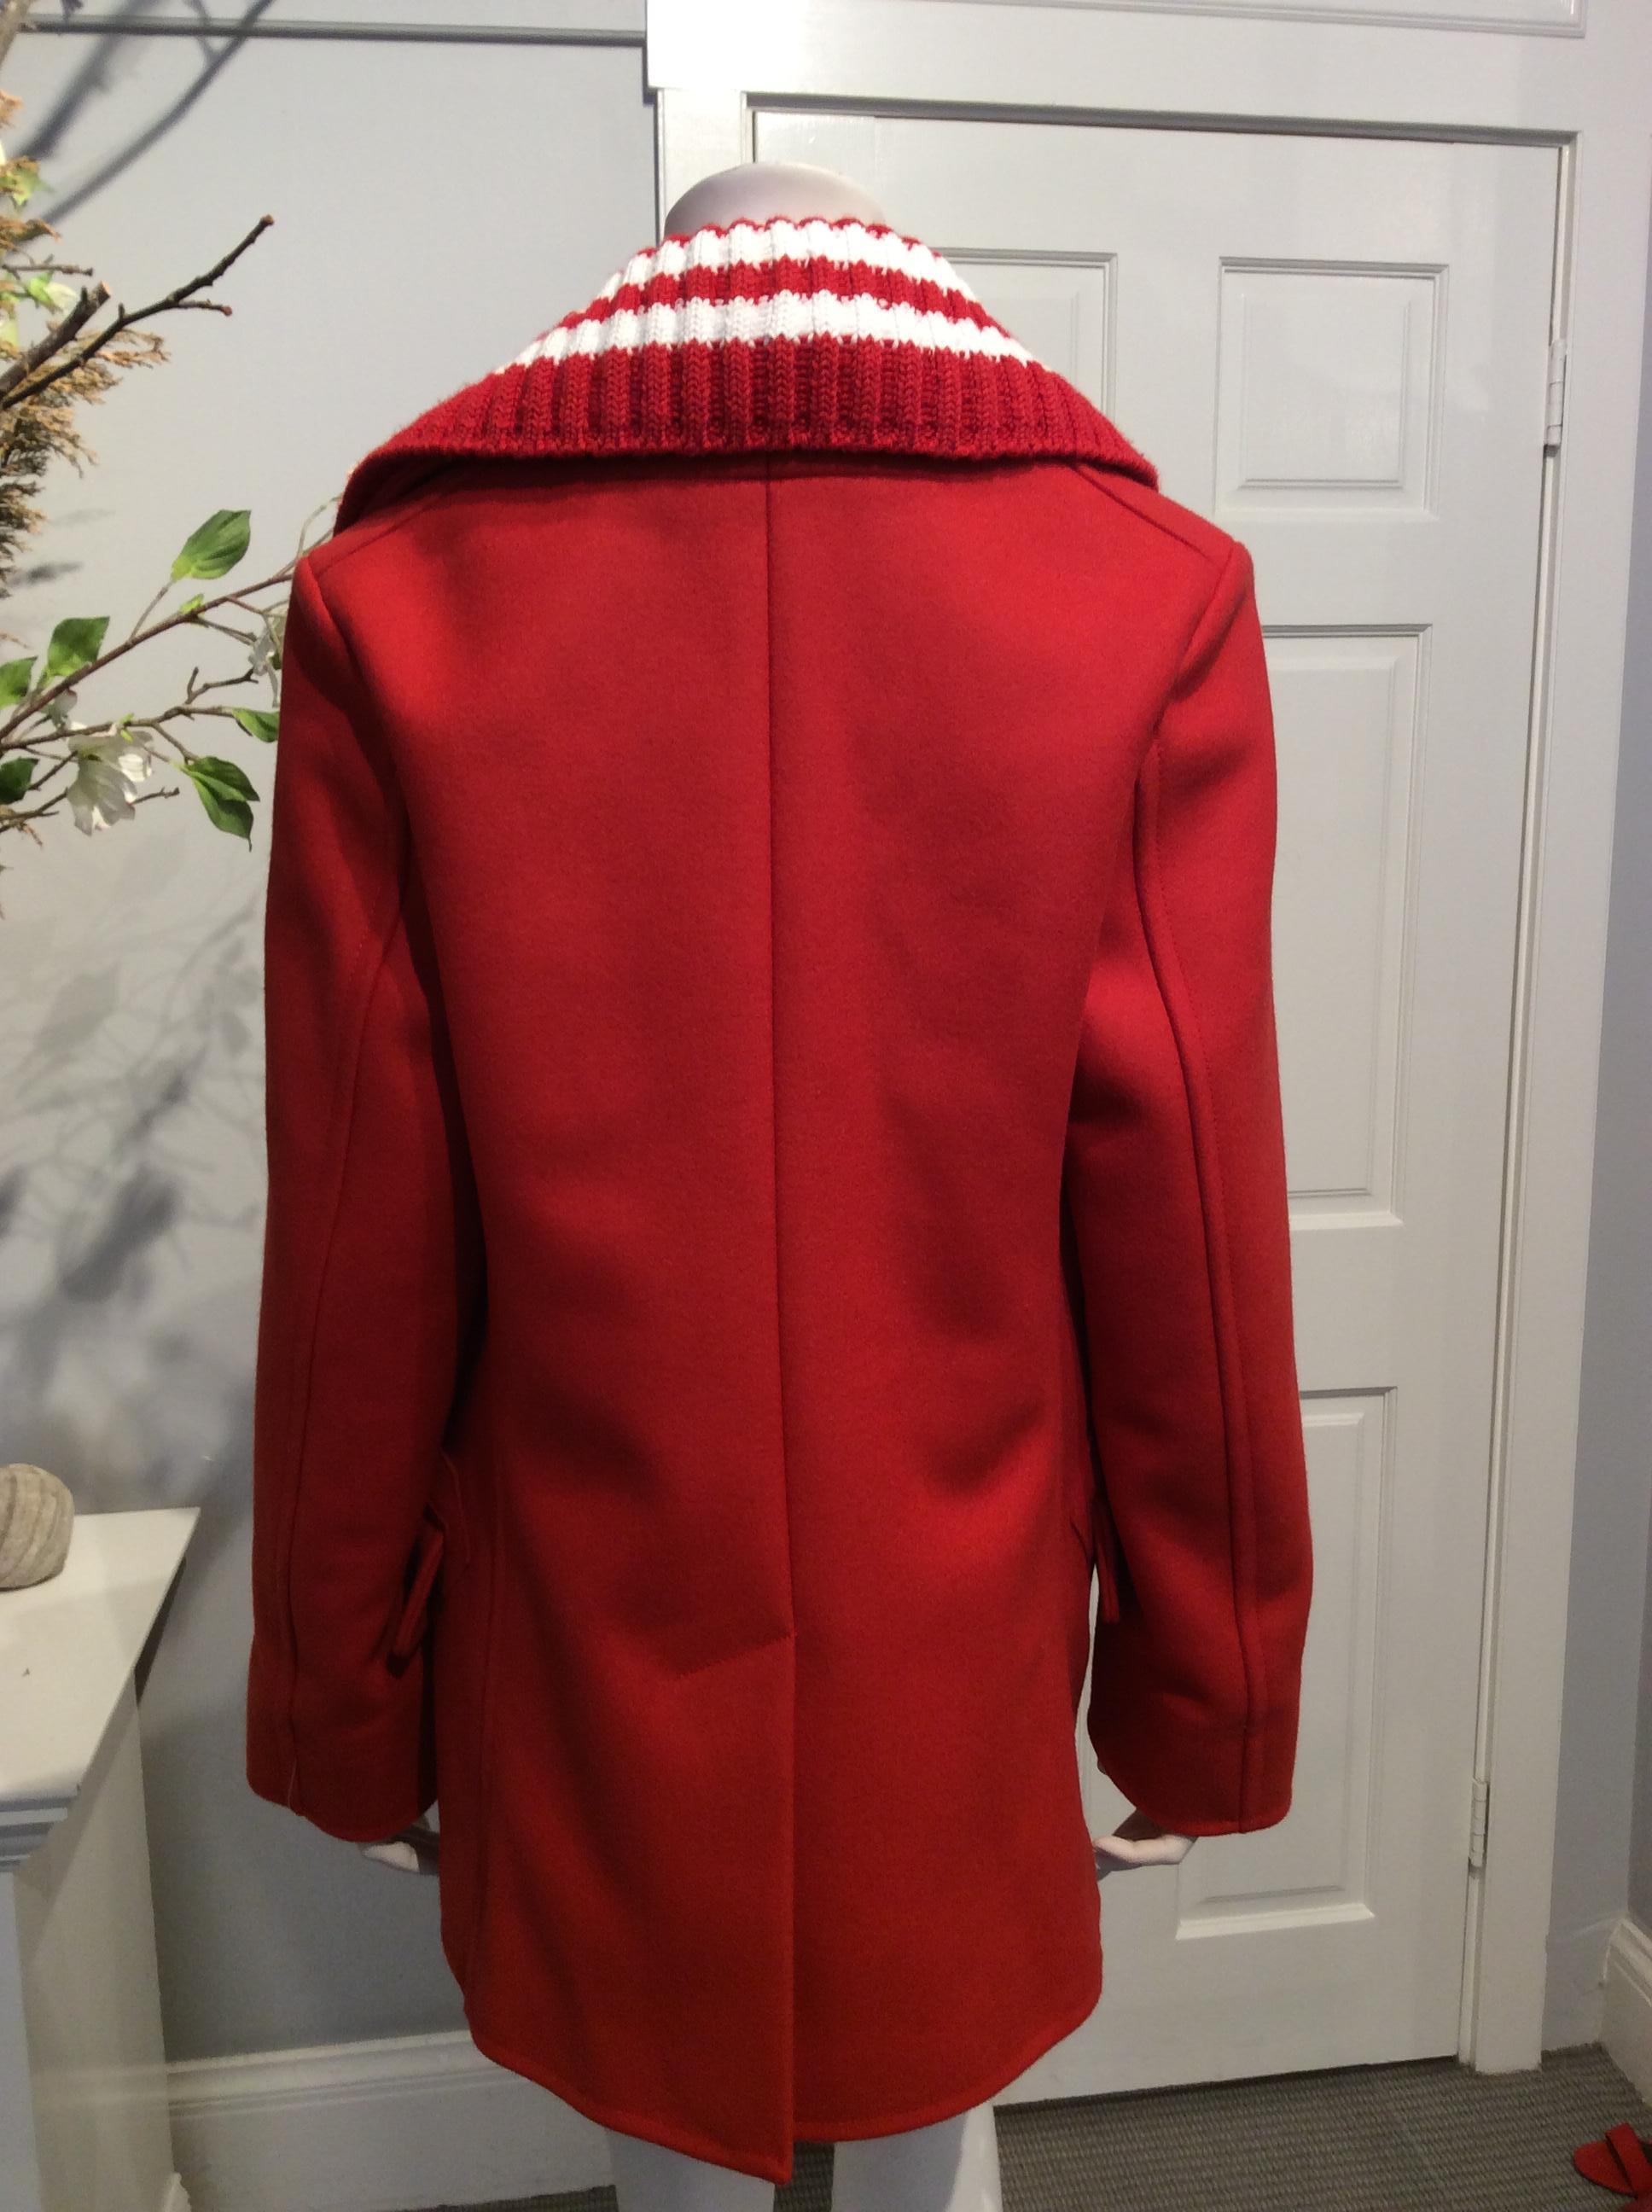 Givenchy Fall/Winter 2017 double breasted red wool pea coat with detachable striped knit collar. Four exterior pockets and two interior pockets.